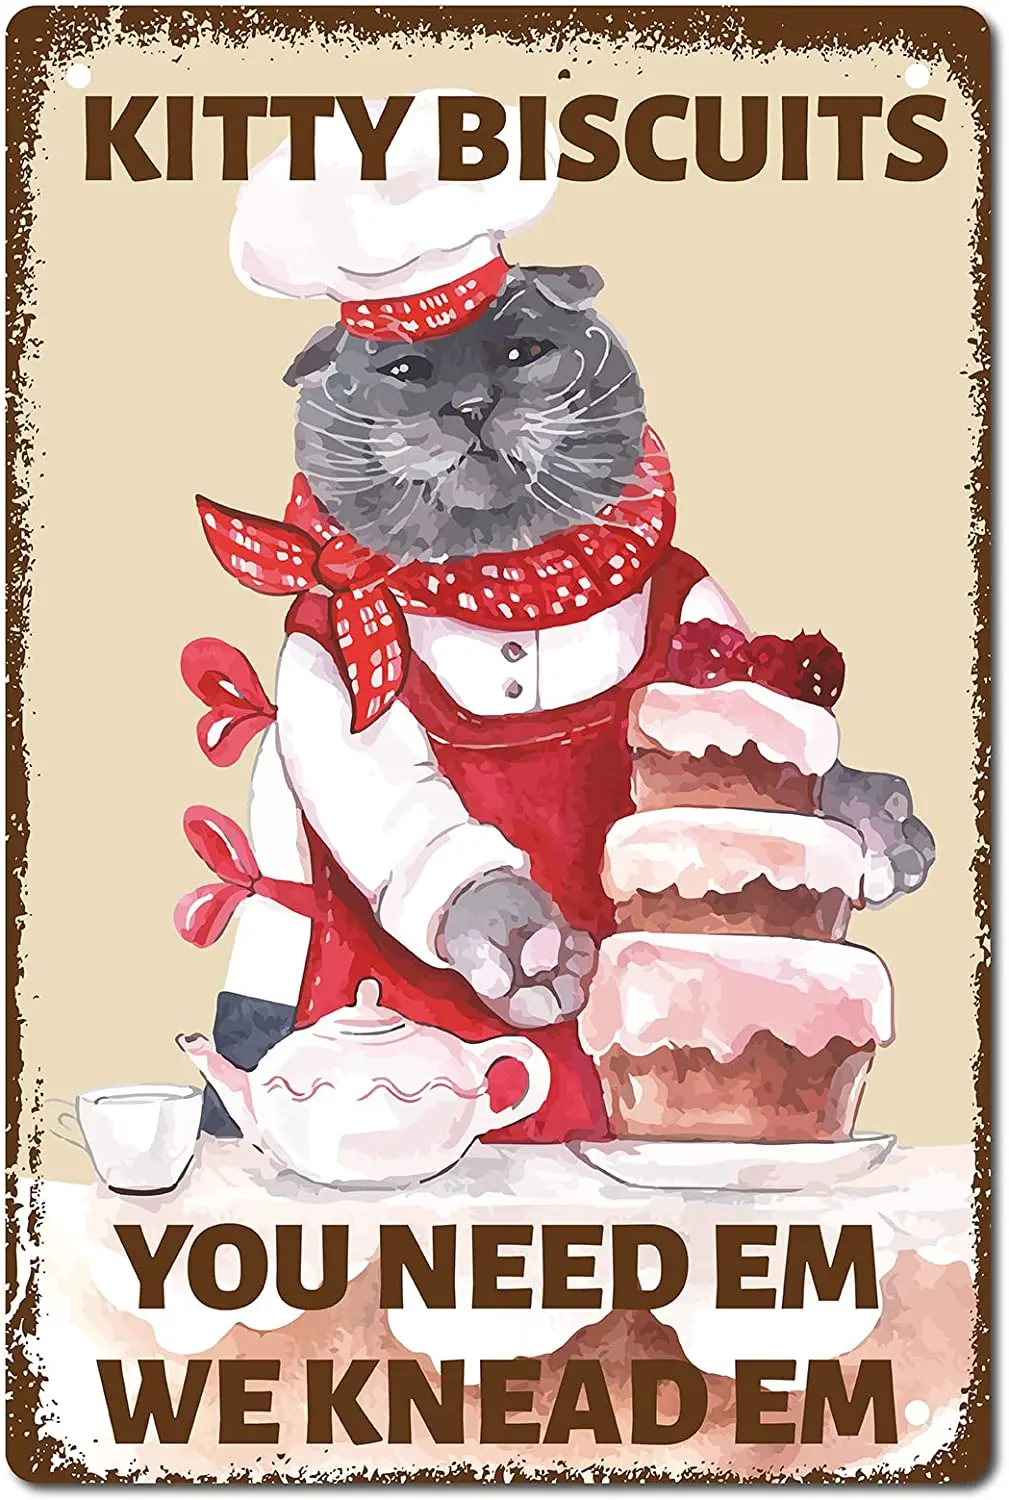 

Cat Metal Tin Sign Kitty Biscuits We Knead Em You Need Funny Sign Vintage Retro Poster Bathroom Quote Vintage Sign for